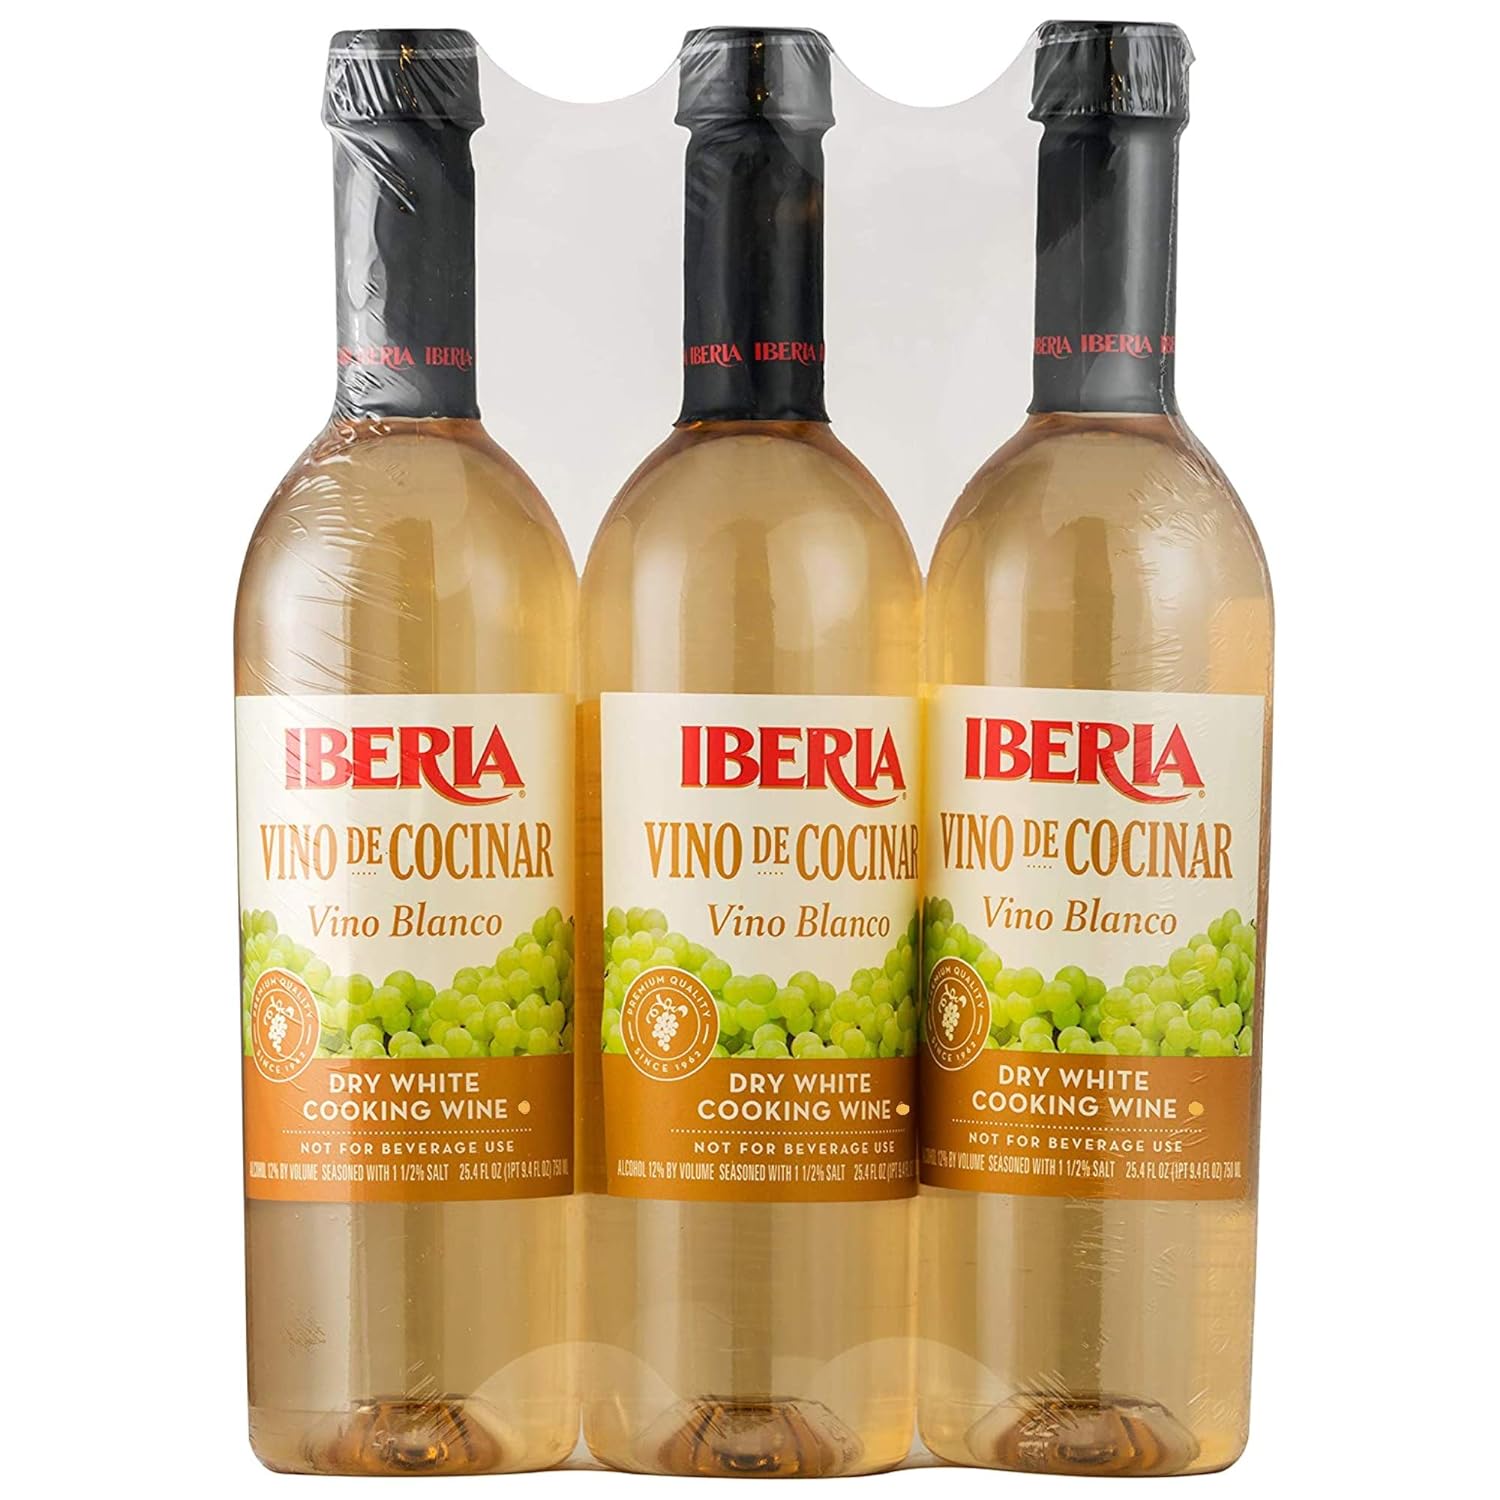 Iberia Dry White Cooking Wine, 25.4 oz (Pack of 3)